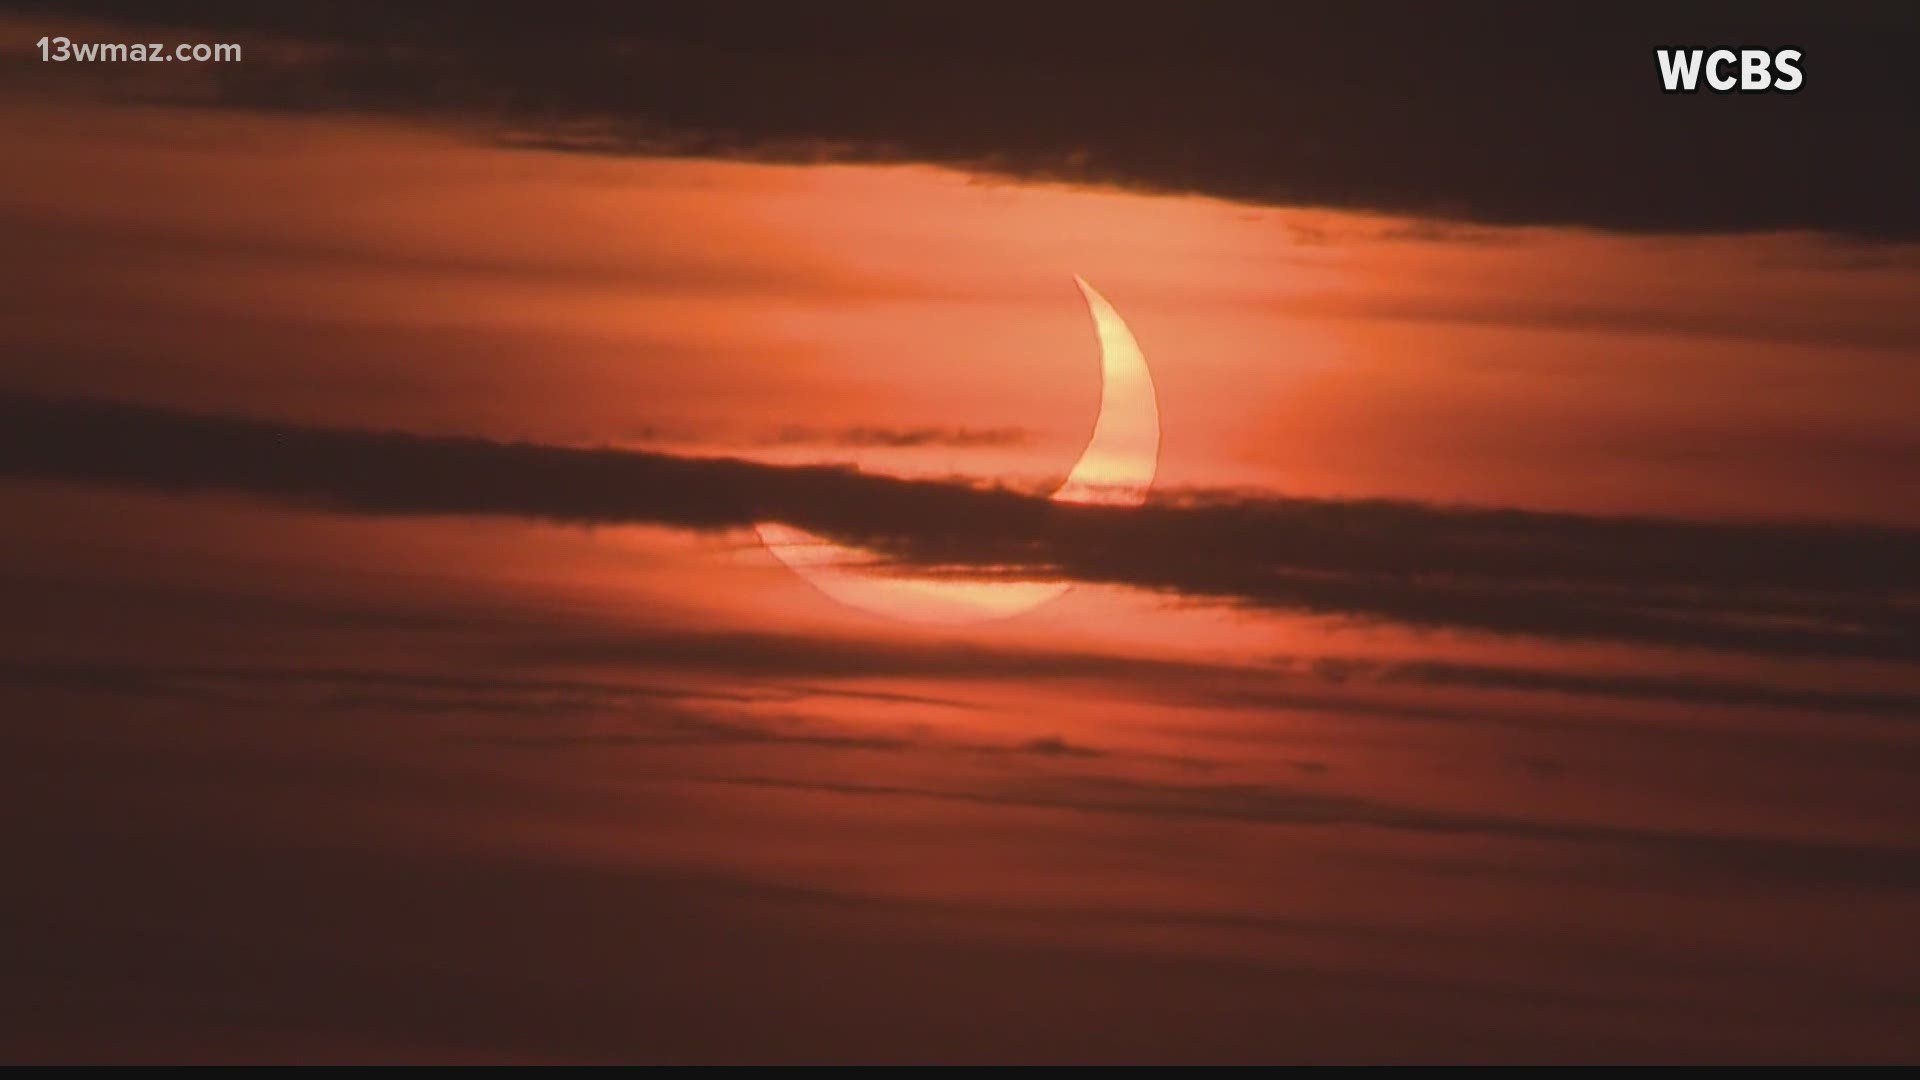 The eclipse was available for a small part of the U.S. at sunrise, but other parts of the world and people online got the full show.